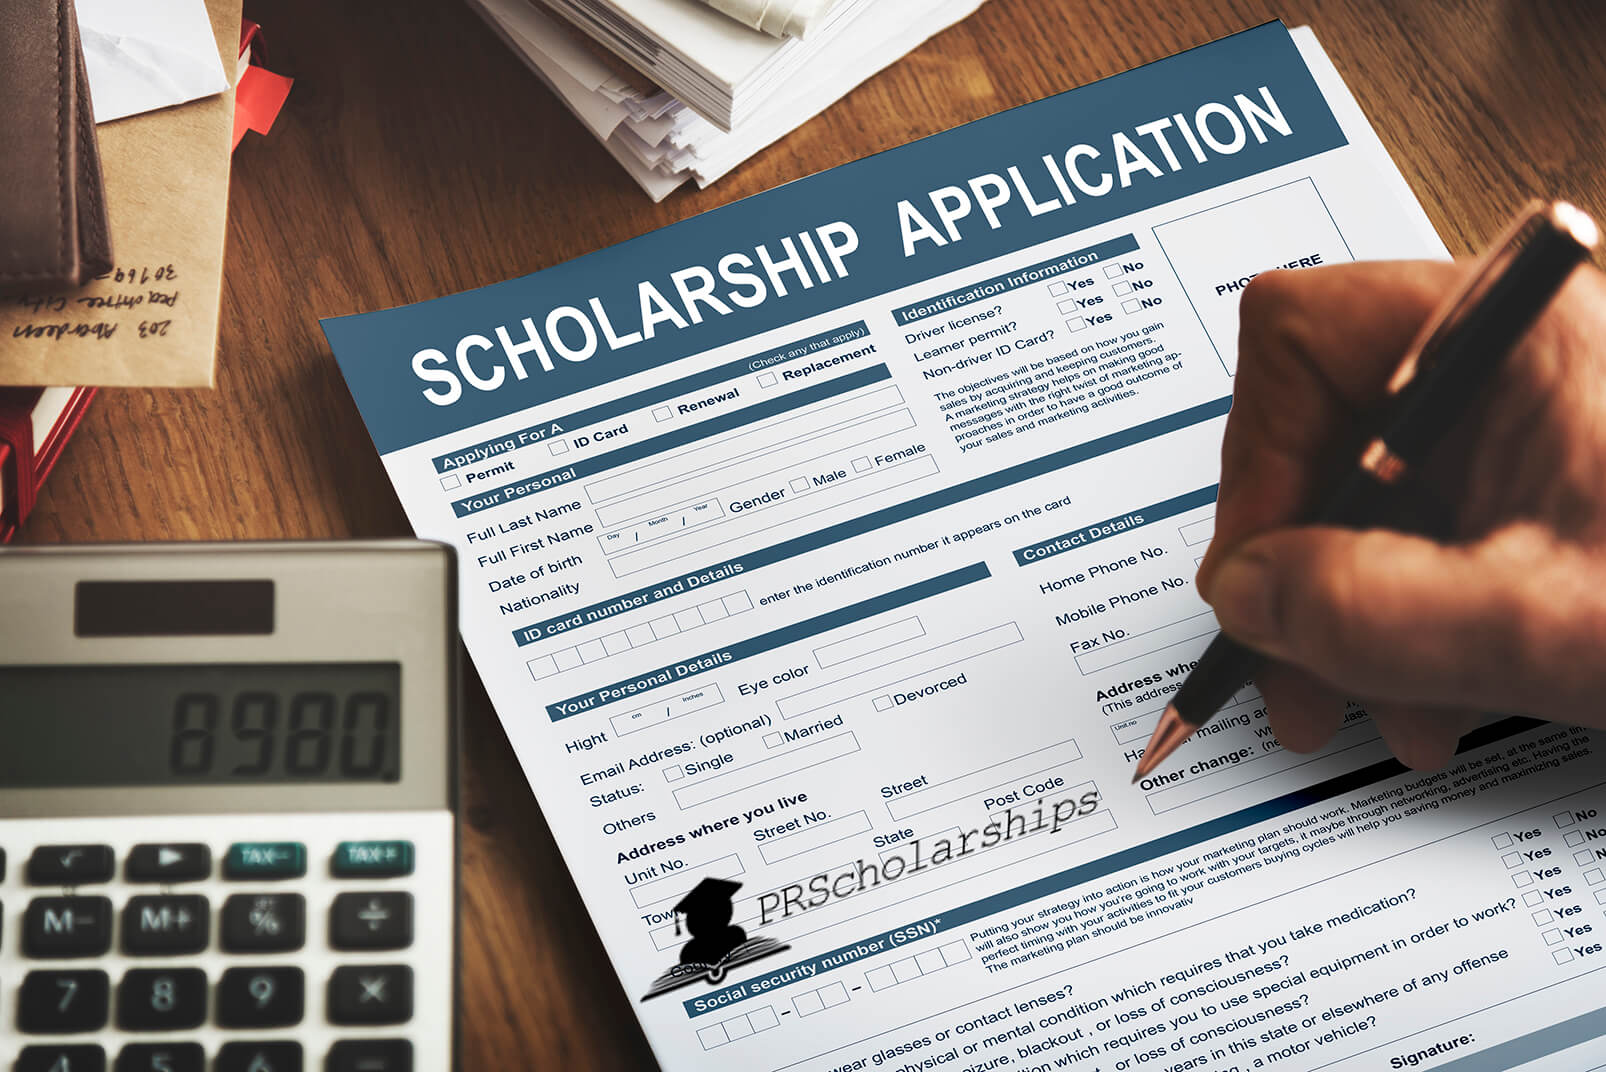 A scholarship application form image telling about government level scholarships